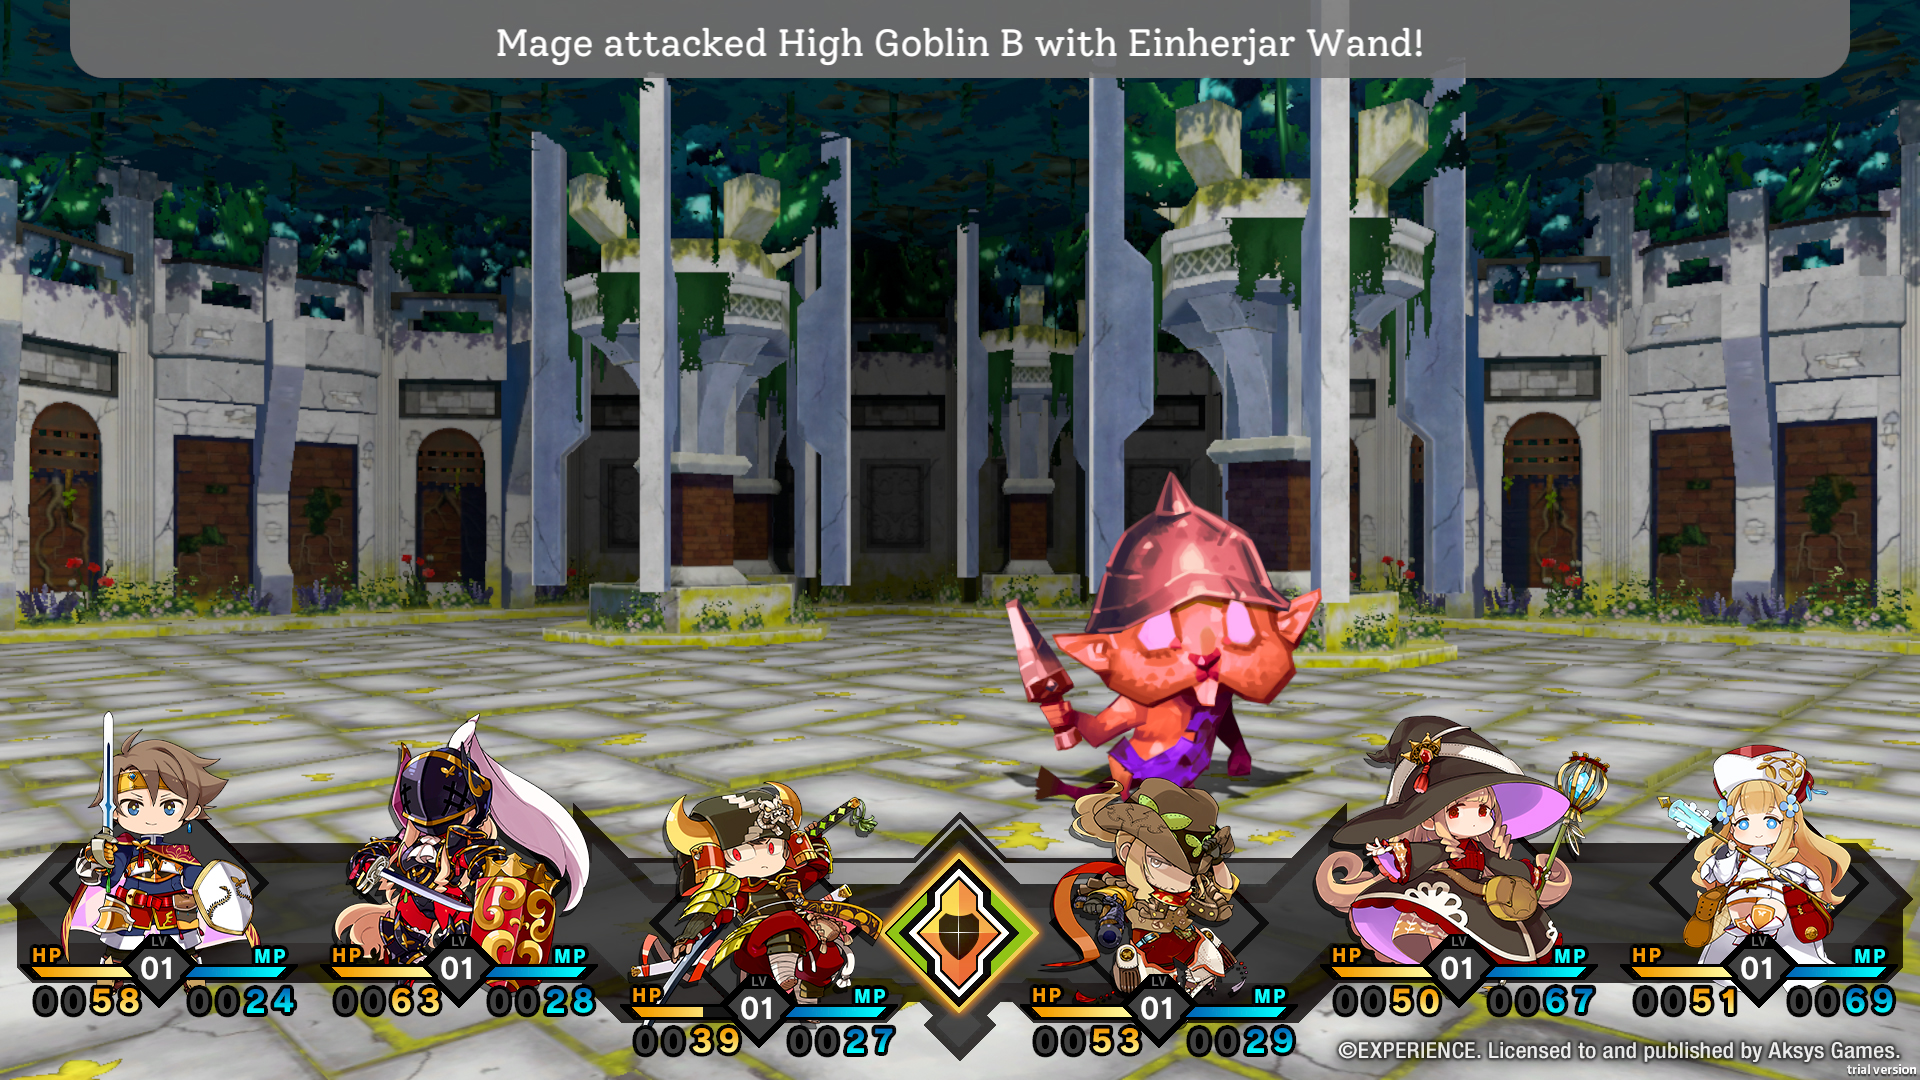 A screenshot from Mon-Yu. Six characters are fighting a High Goblin, and one has hit it with the Einherjar Wand.